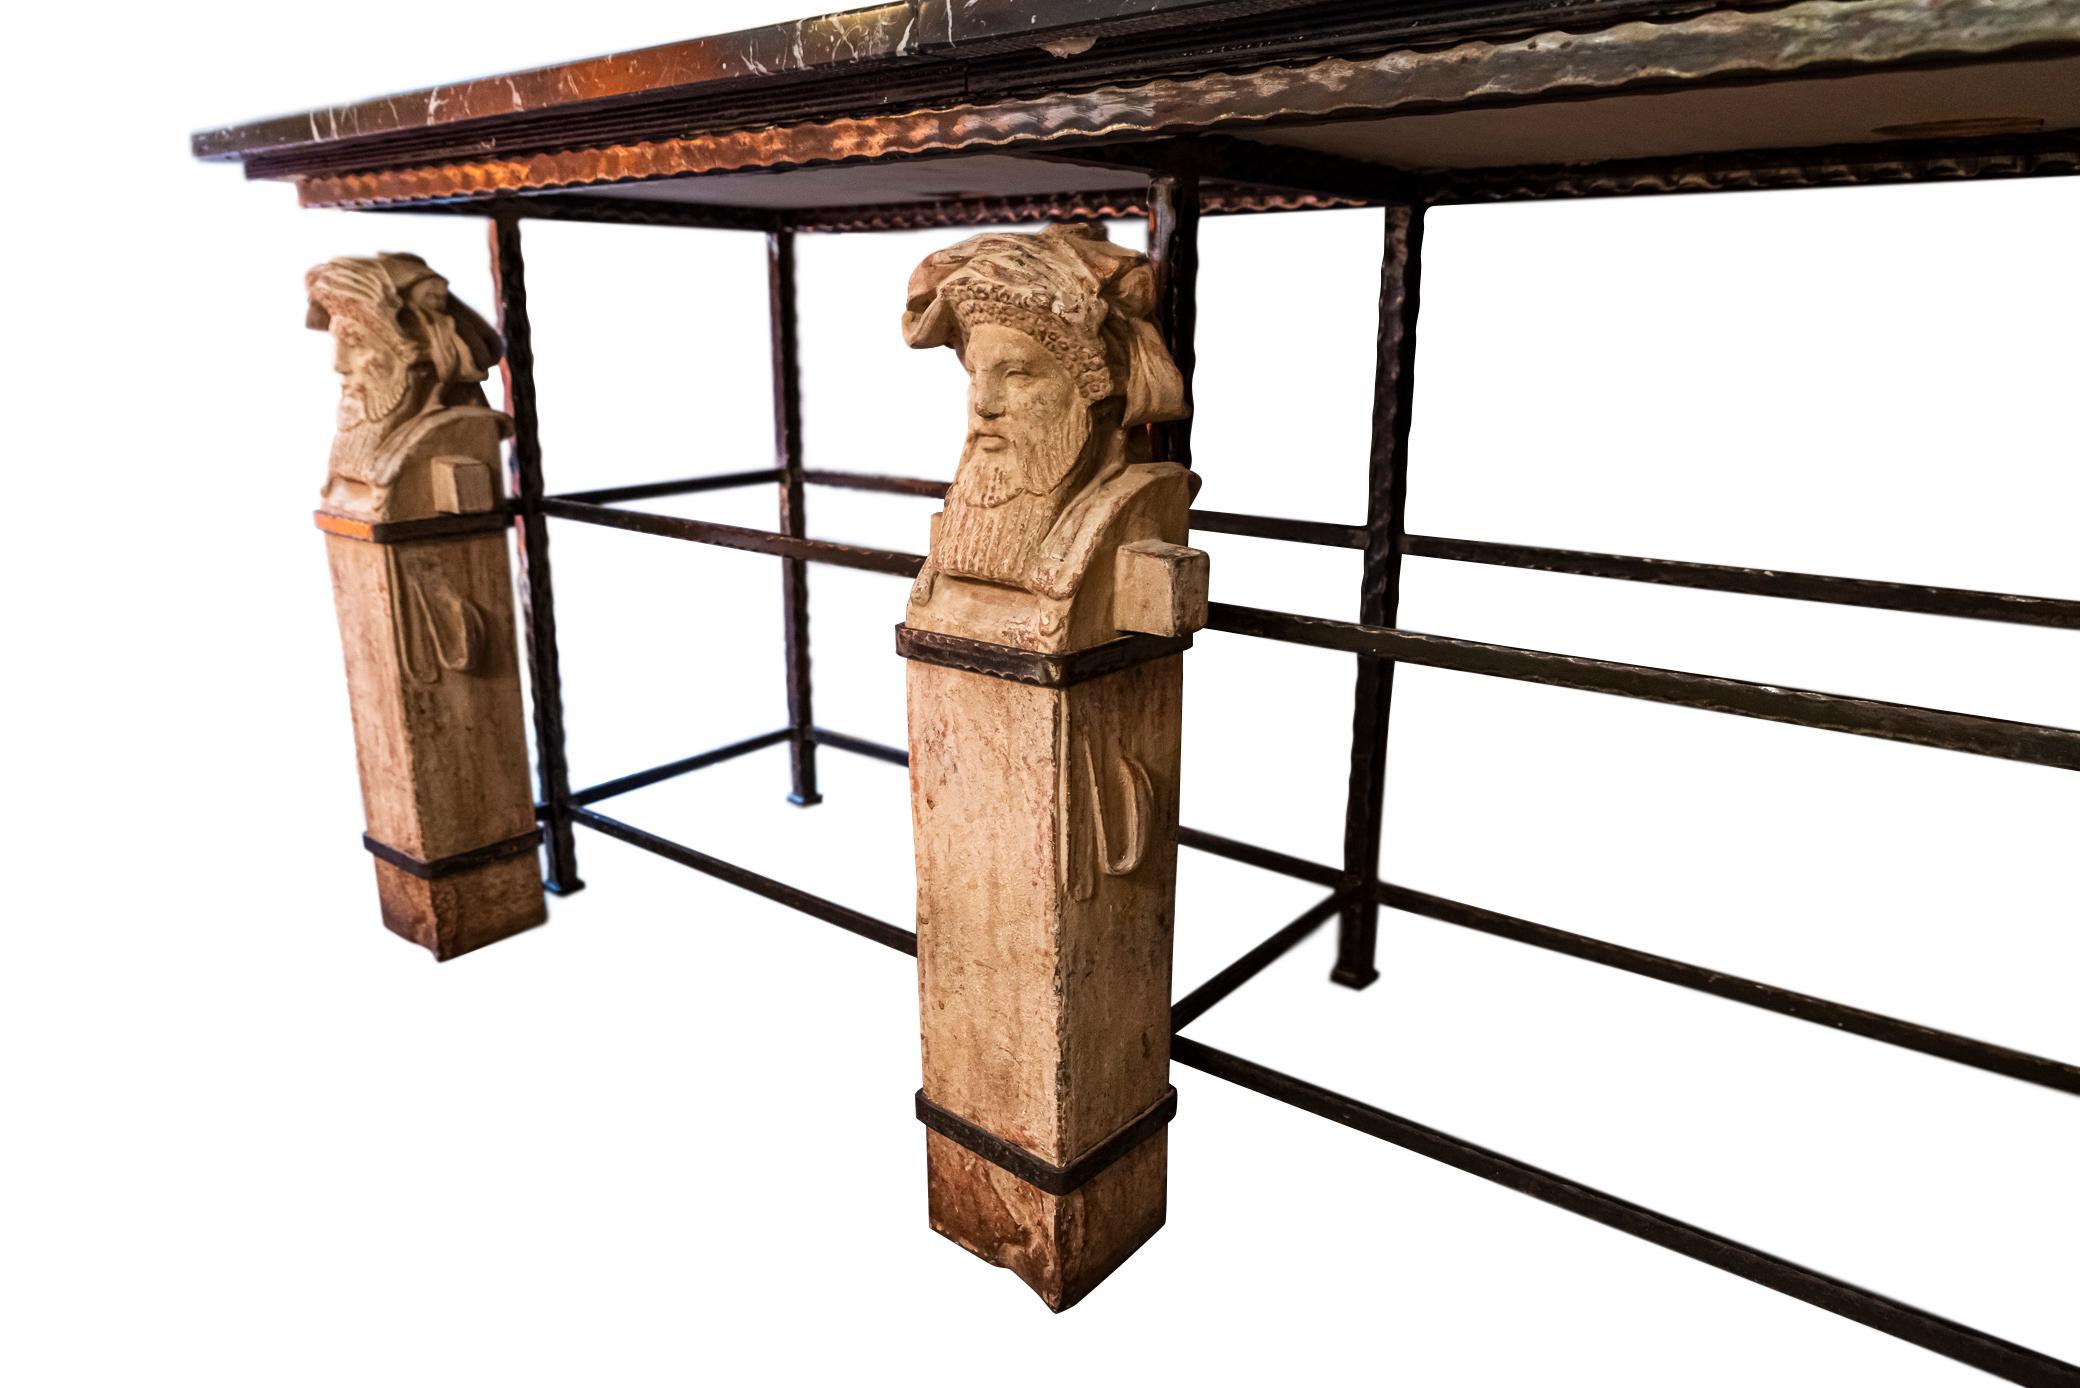 Important console,
Iron, marble and terracotta,
Caryatid terracotta stands in the style of the Antique from the Bardo Museum,
France, circa 1970.

Provenance: Hotel Ellington, Nice.

Measures: Width 290 cm, height 87 cm, depth 70 cm.